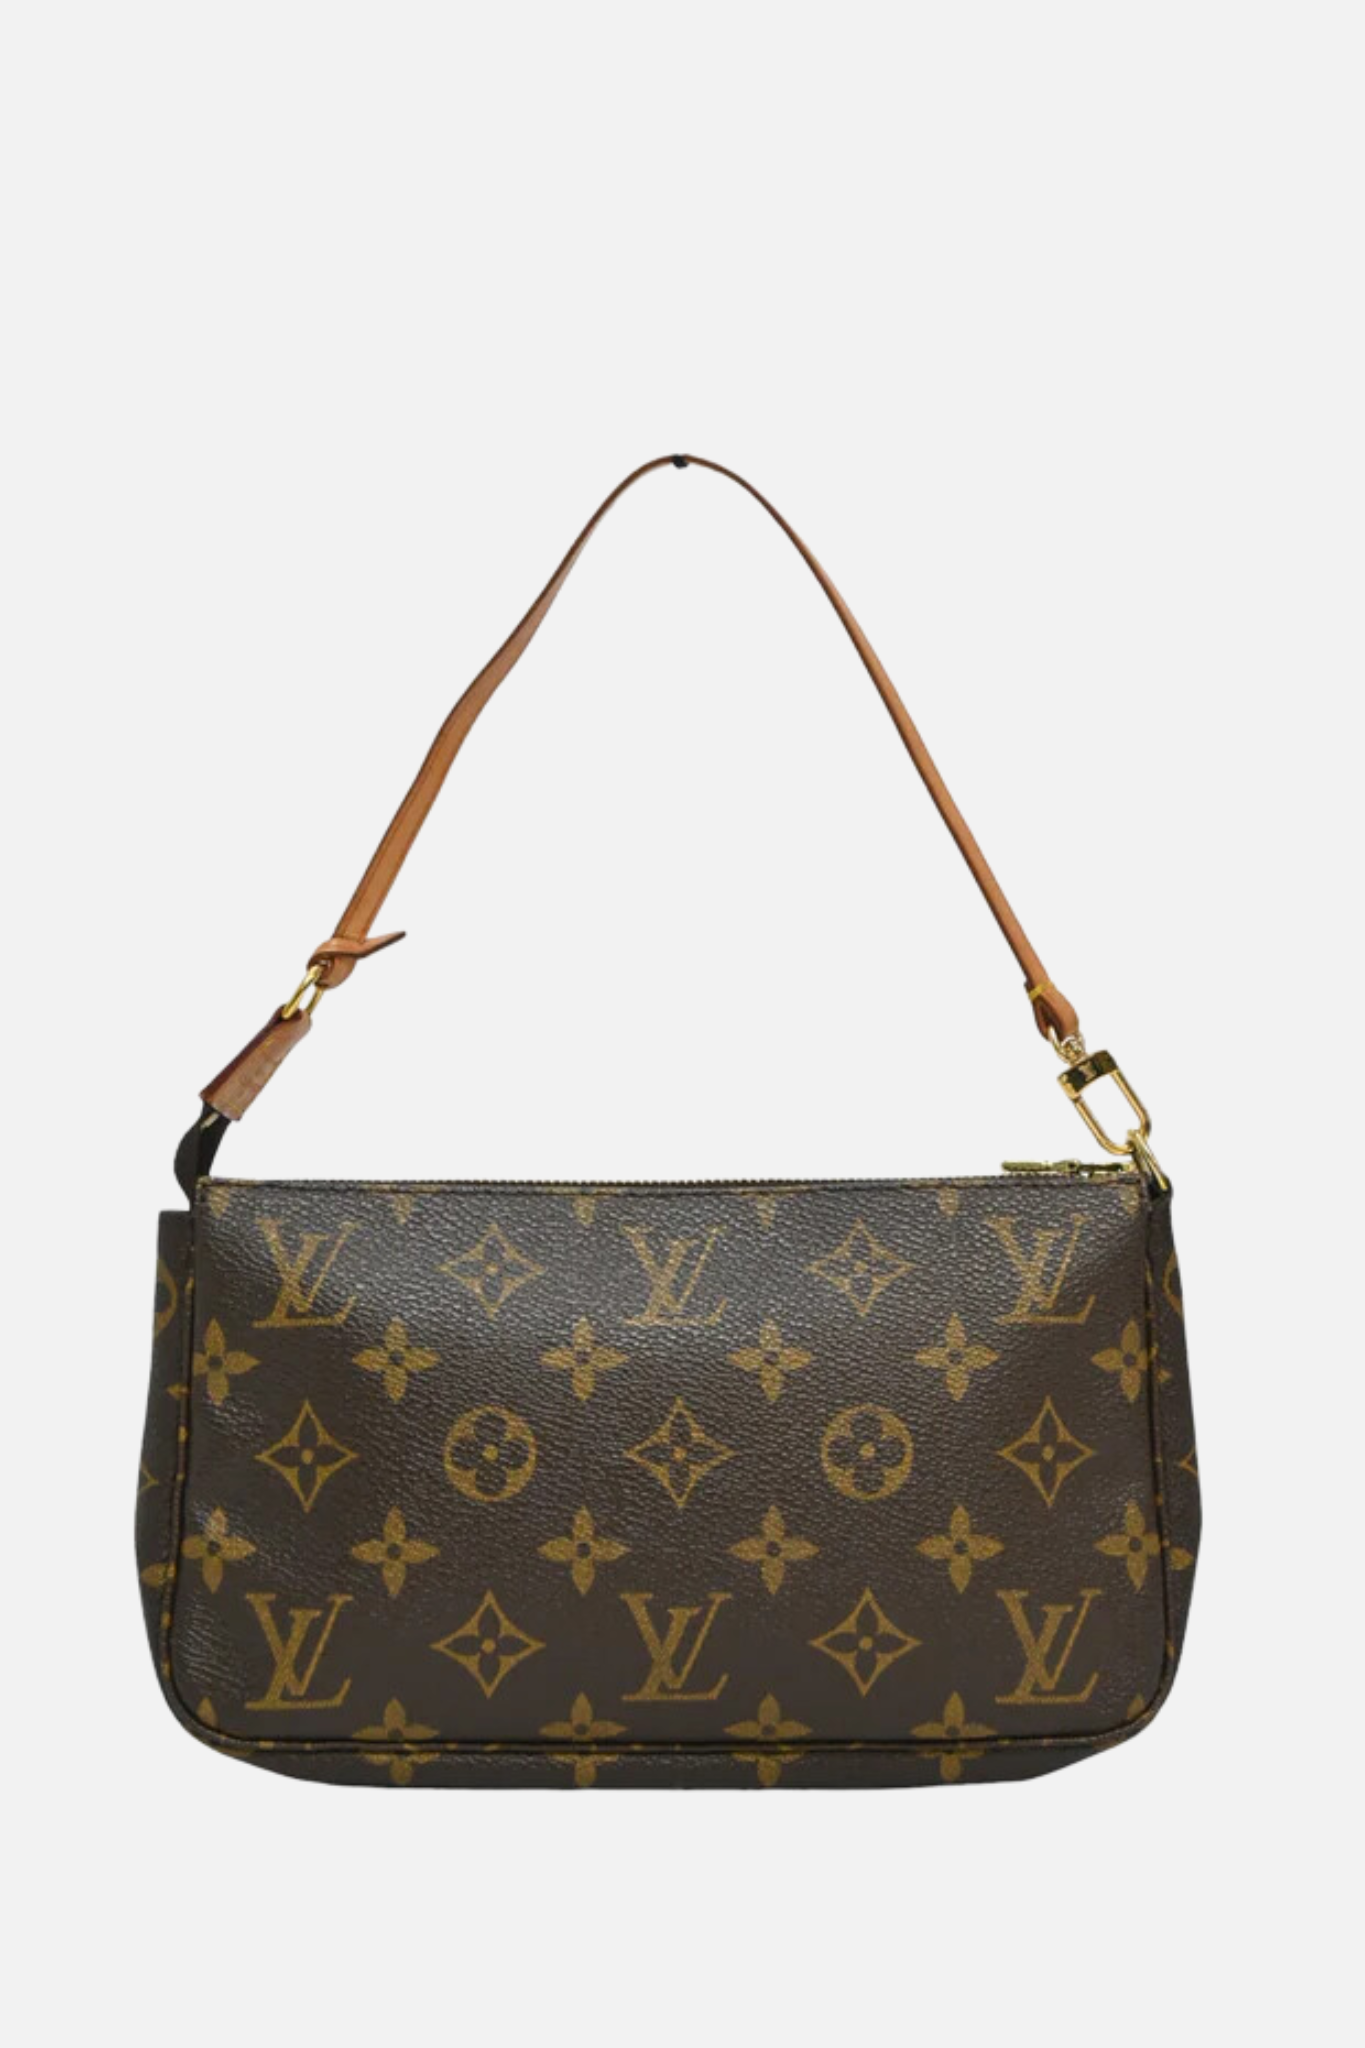 TAM collections - LV Office bag - 13,000 To order, Call or